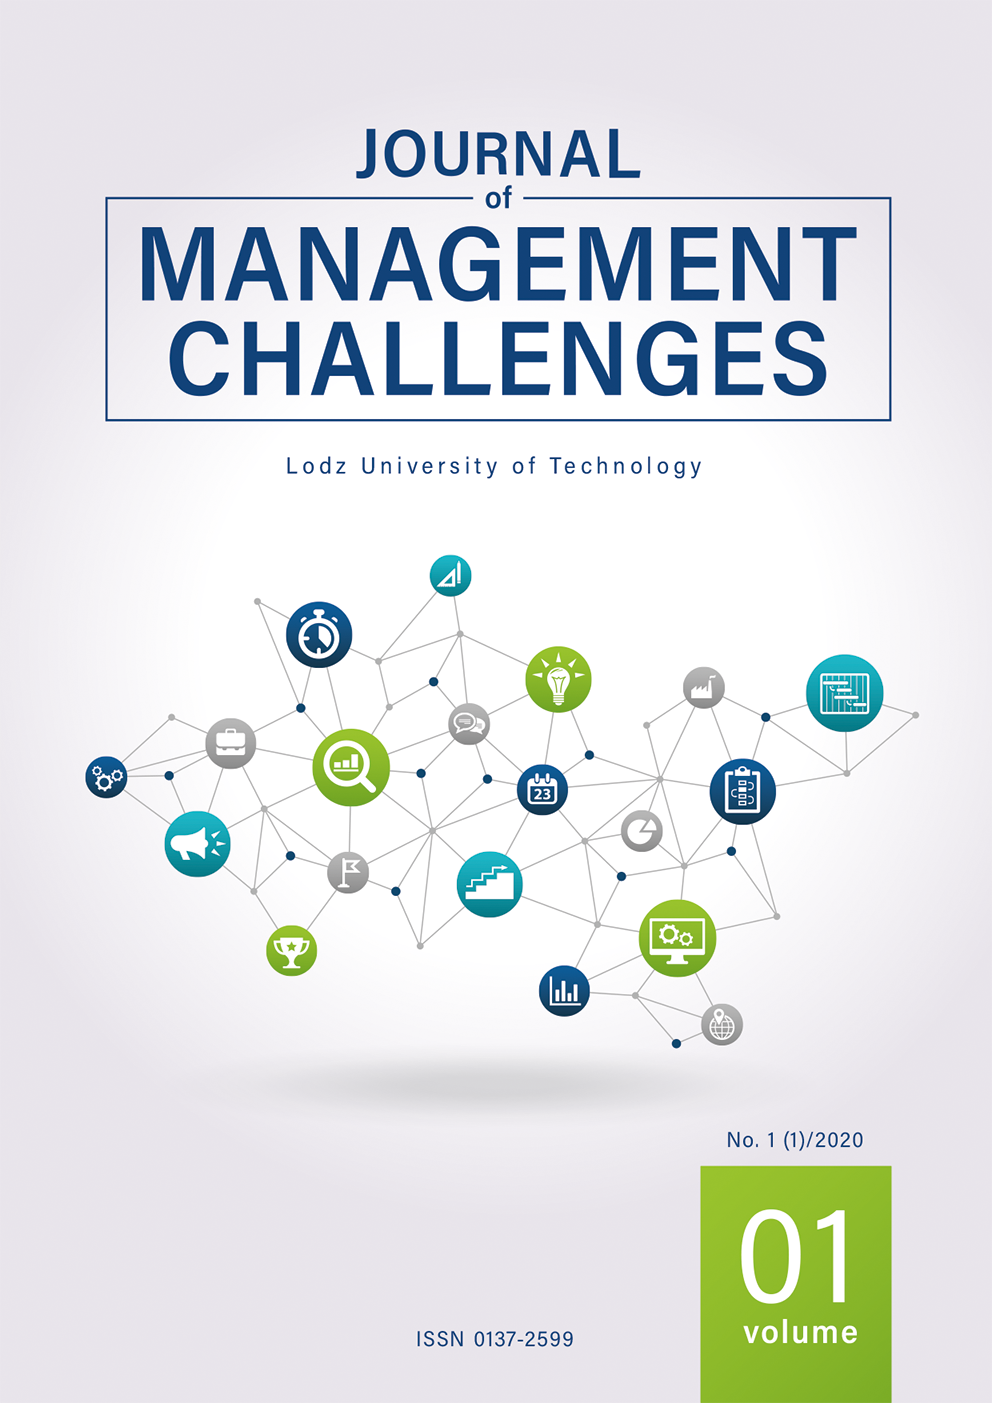 Journal of Management Challenges front cover. Light grey background. Icons of time, calendar, speech, production and other management challenges aggregated in one network in front.